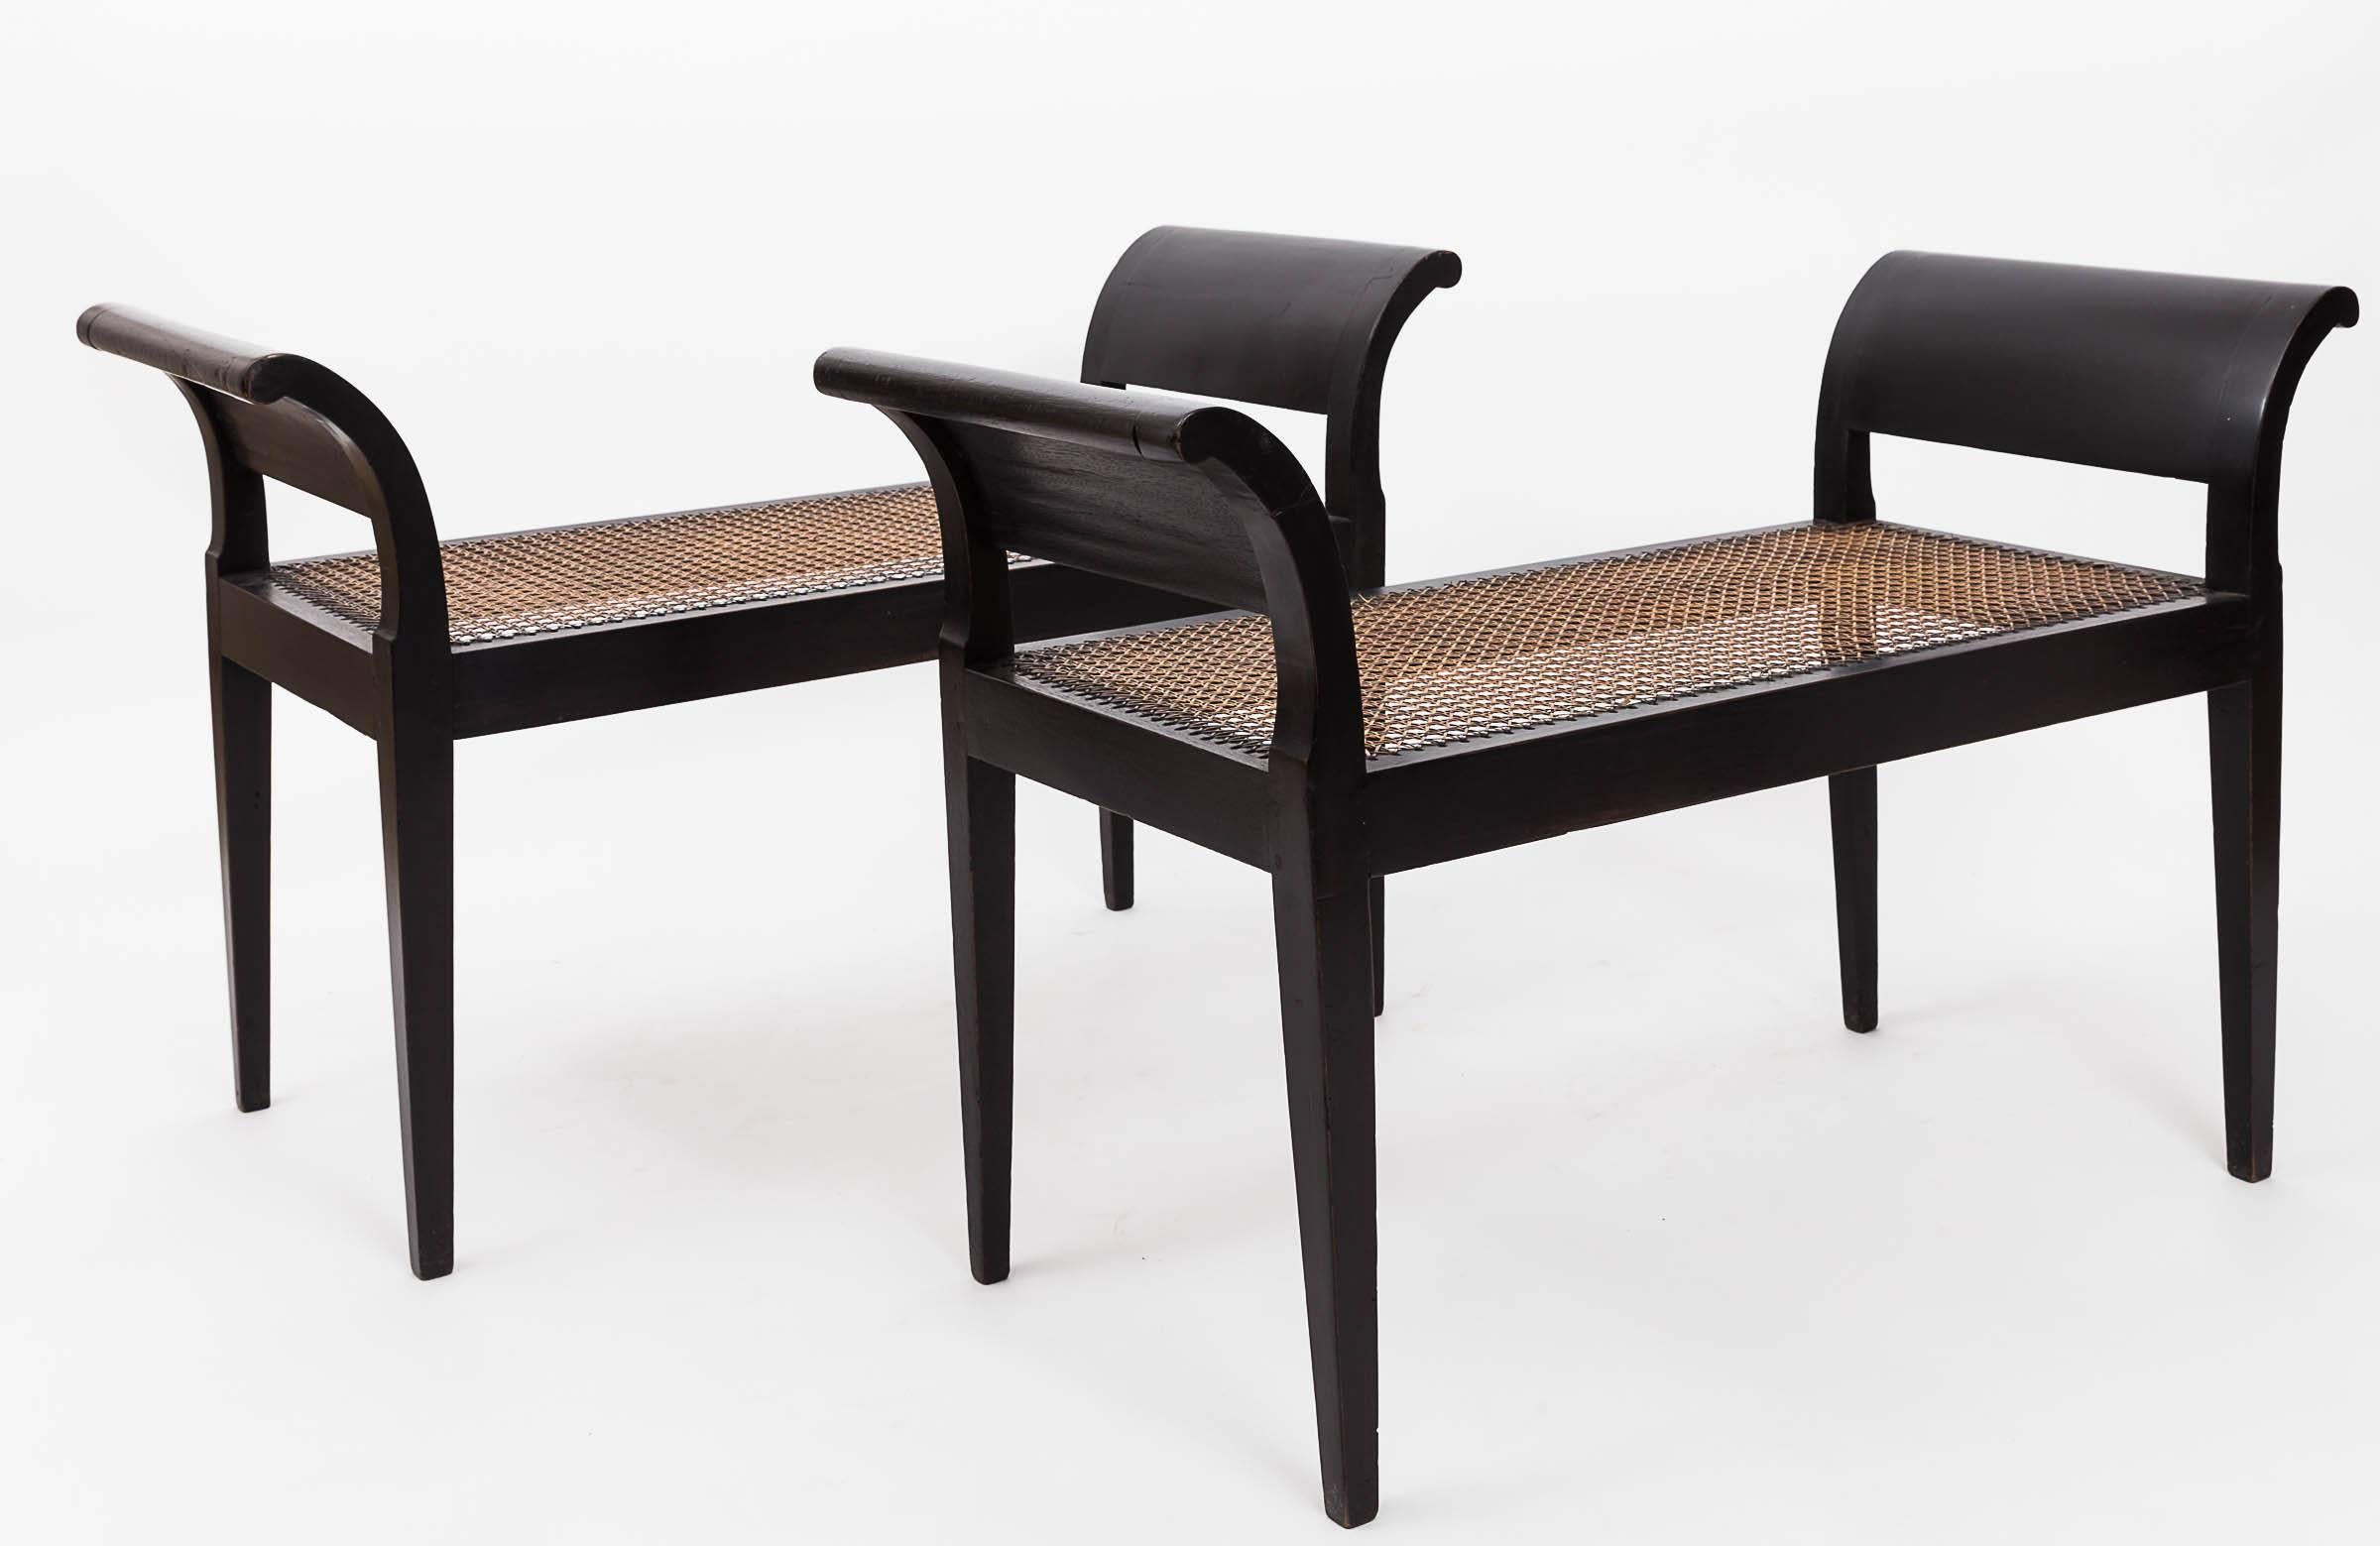 Ebonized mahogany with tapered legs, scrolled arm, caned seats and linen cushion. Can be purchased as a single - $3,000